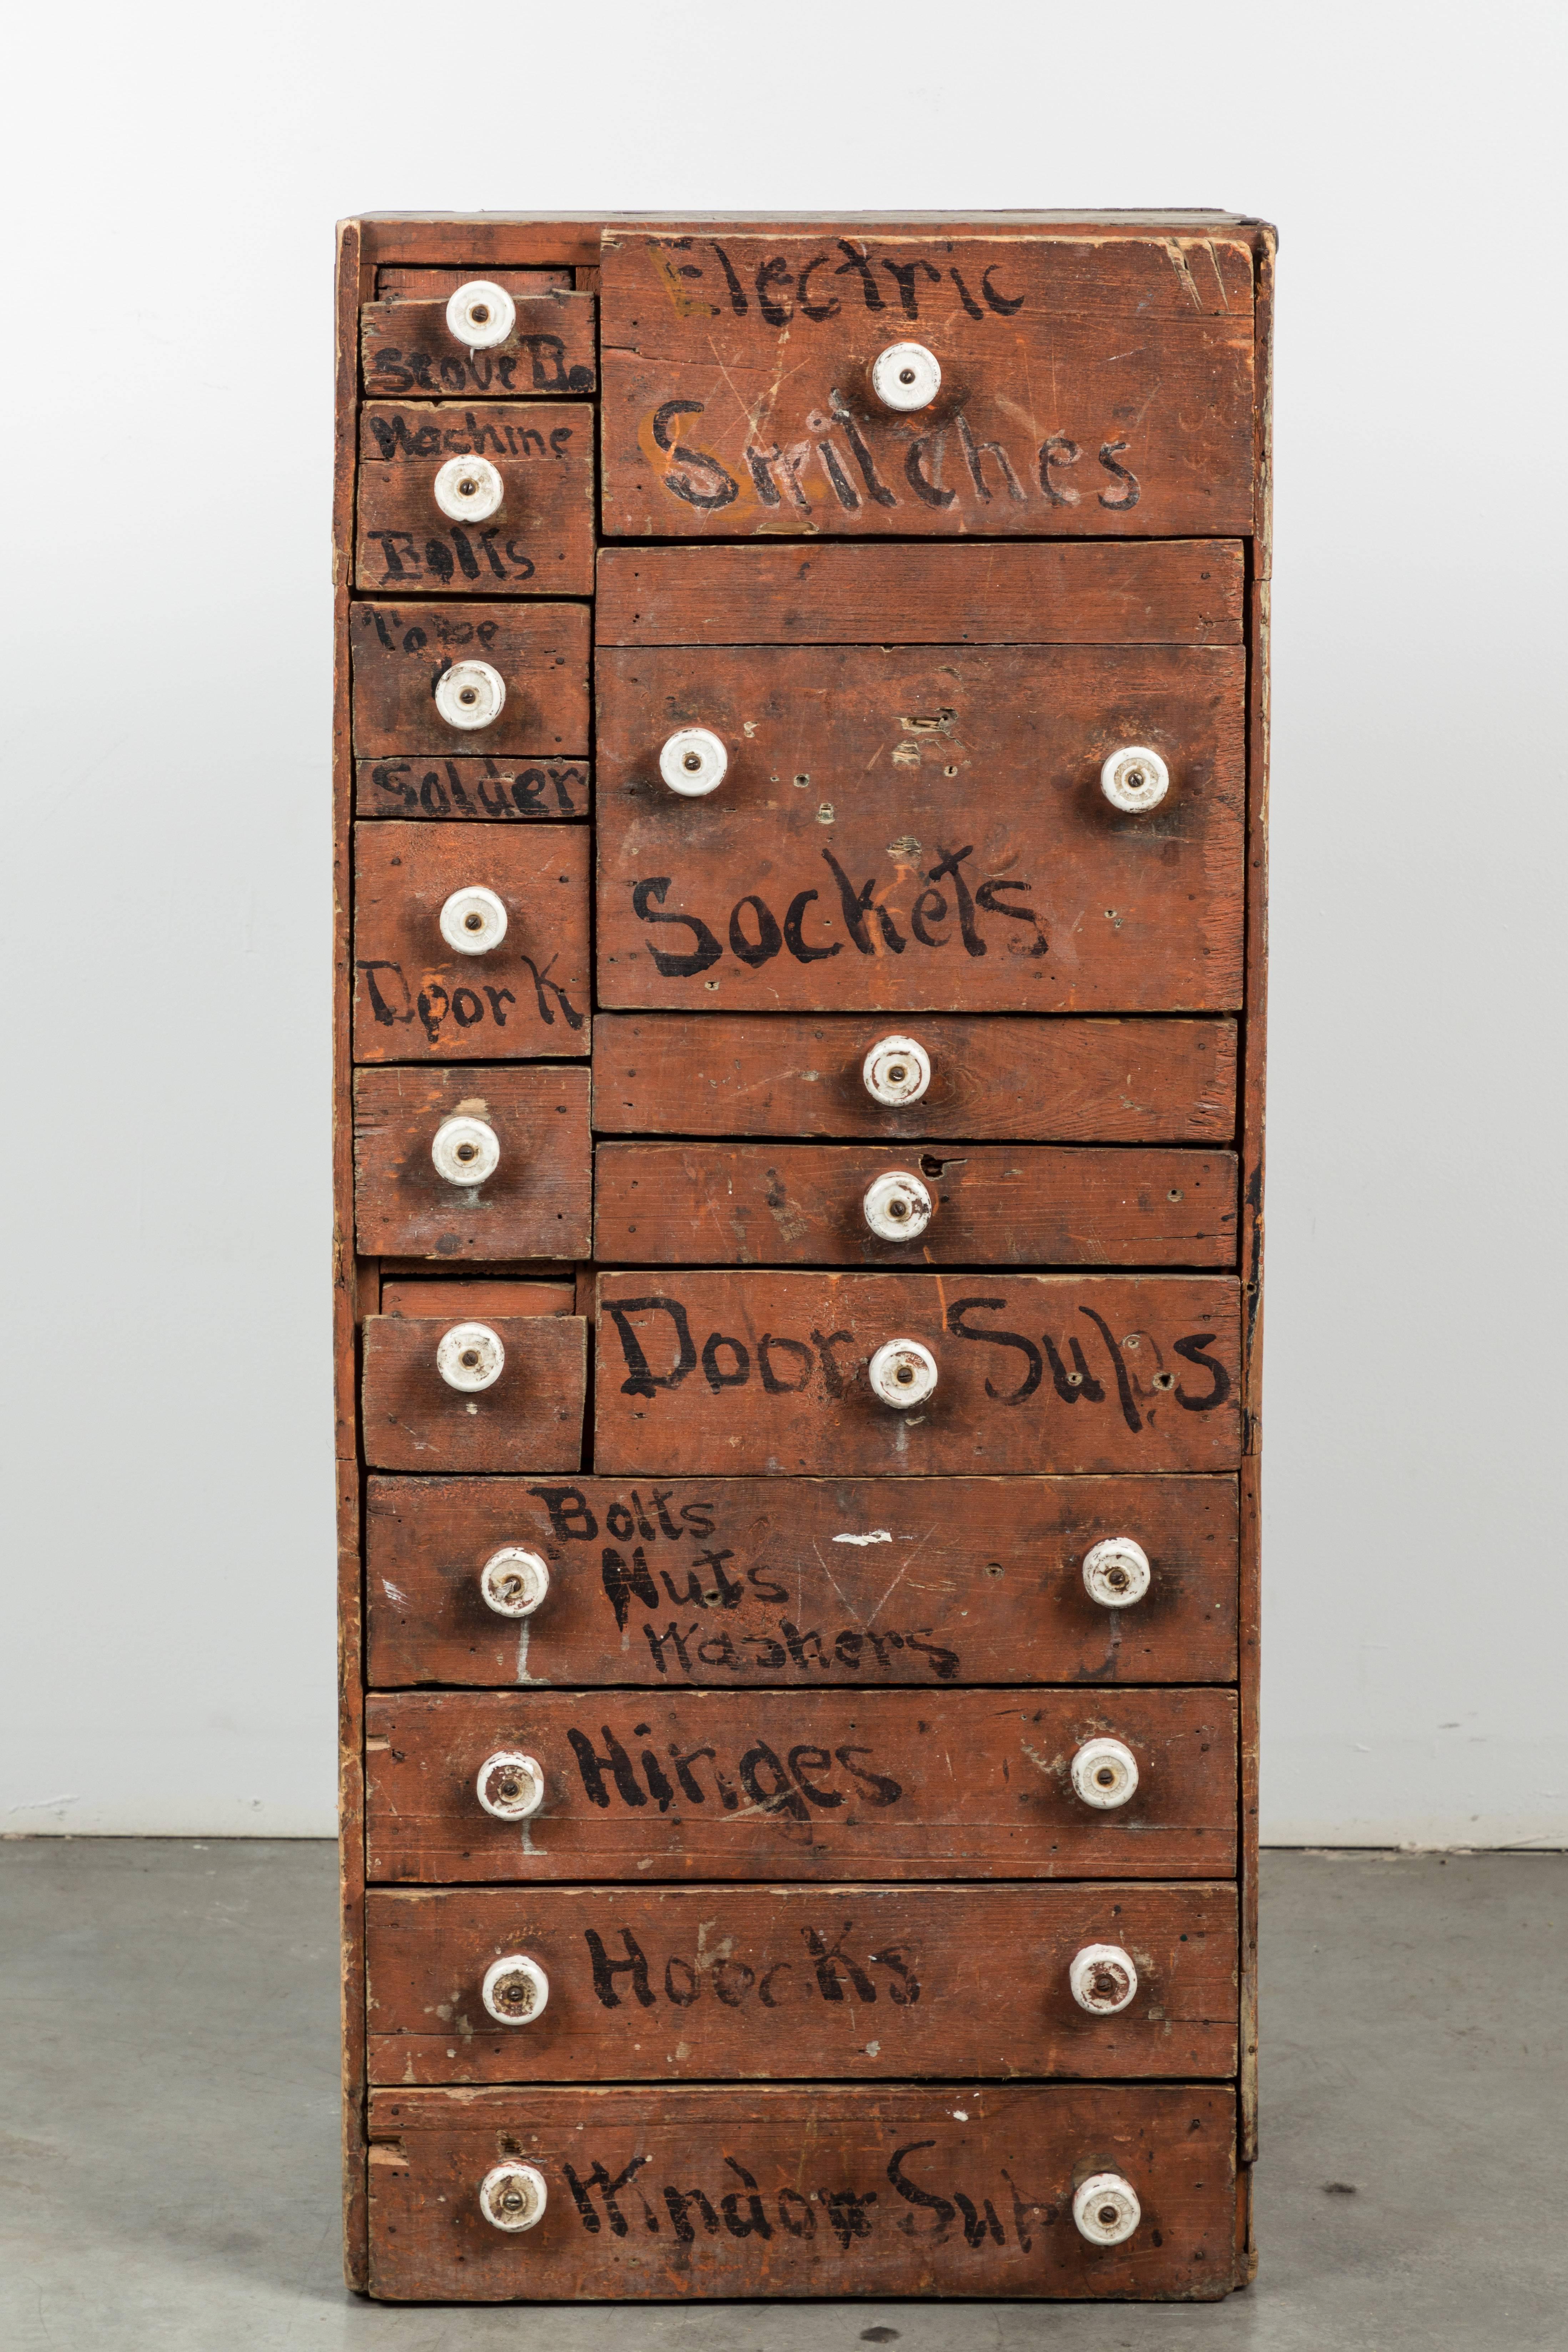 20th Century General Store Hardware Cubby Apothecary Bins Found in the Midwest, circa 1900